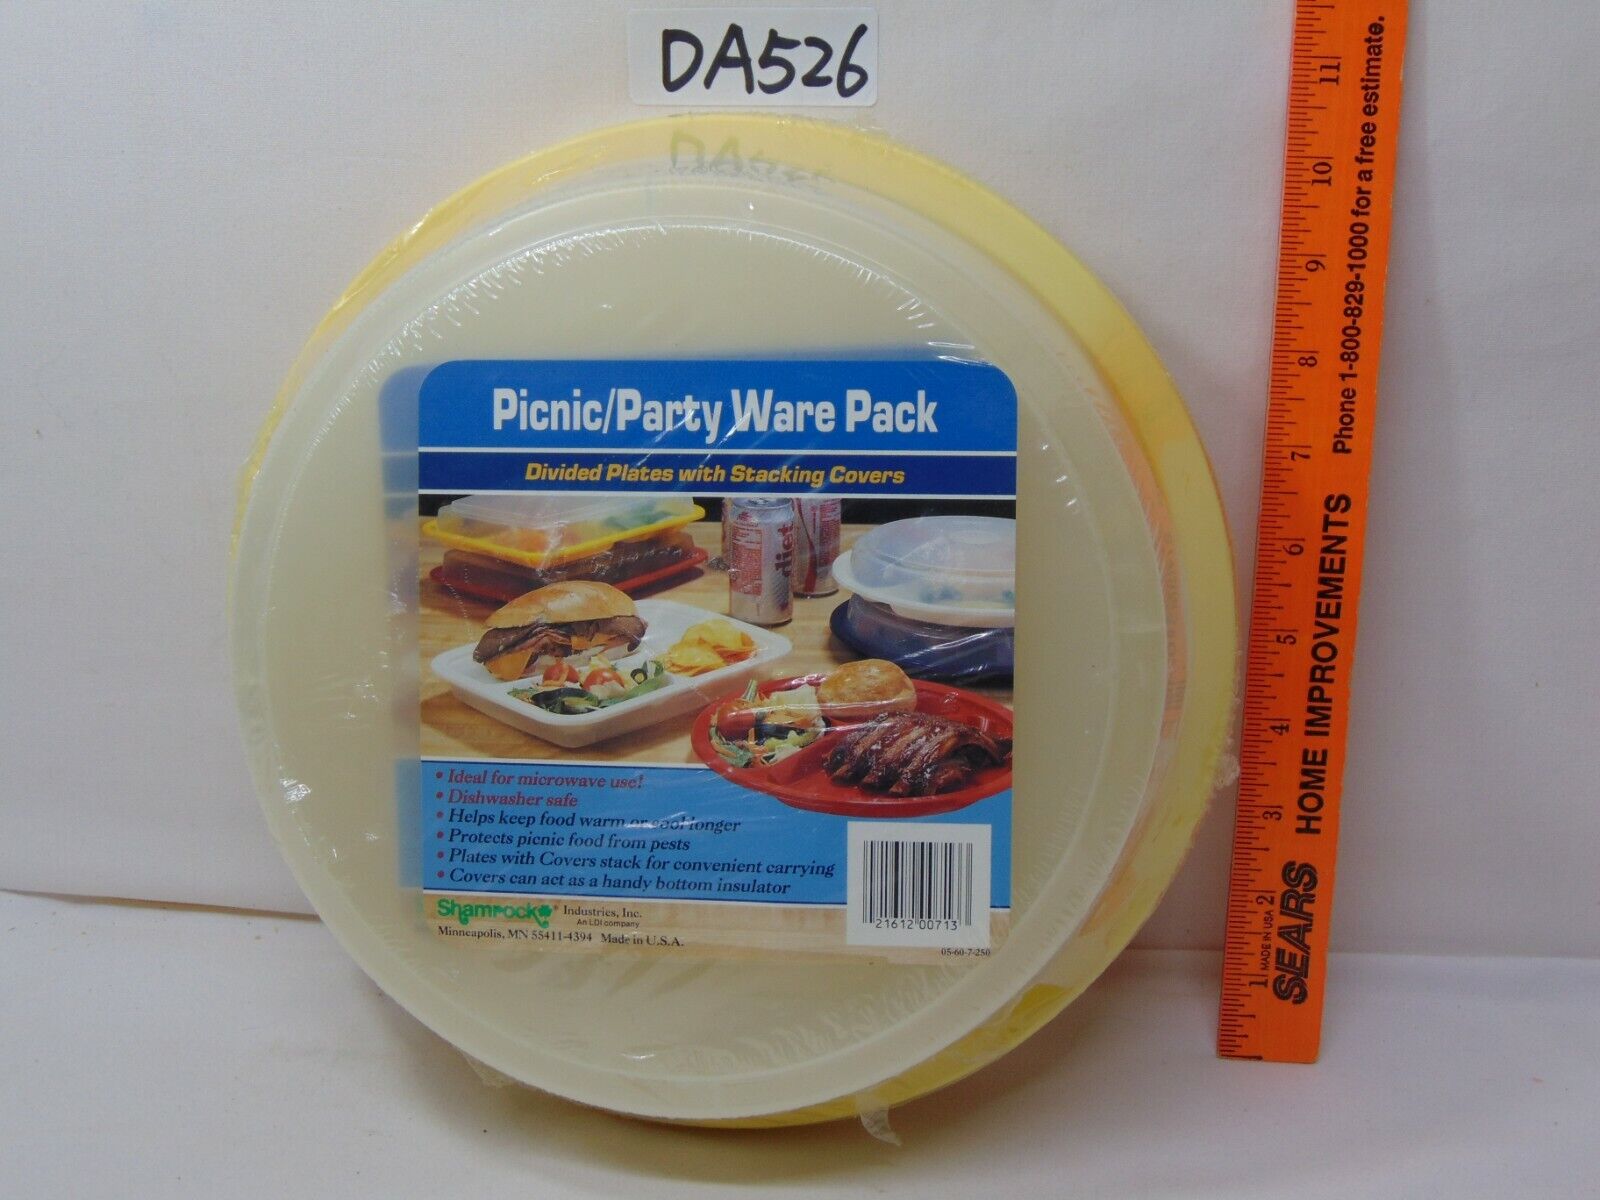 4 VINTAGE NEW NOS PICNIC PARTY WARE PACK COVERED DIVIDED PLATES MOVIE PROP 